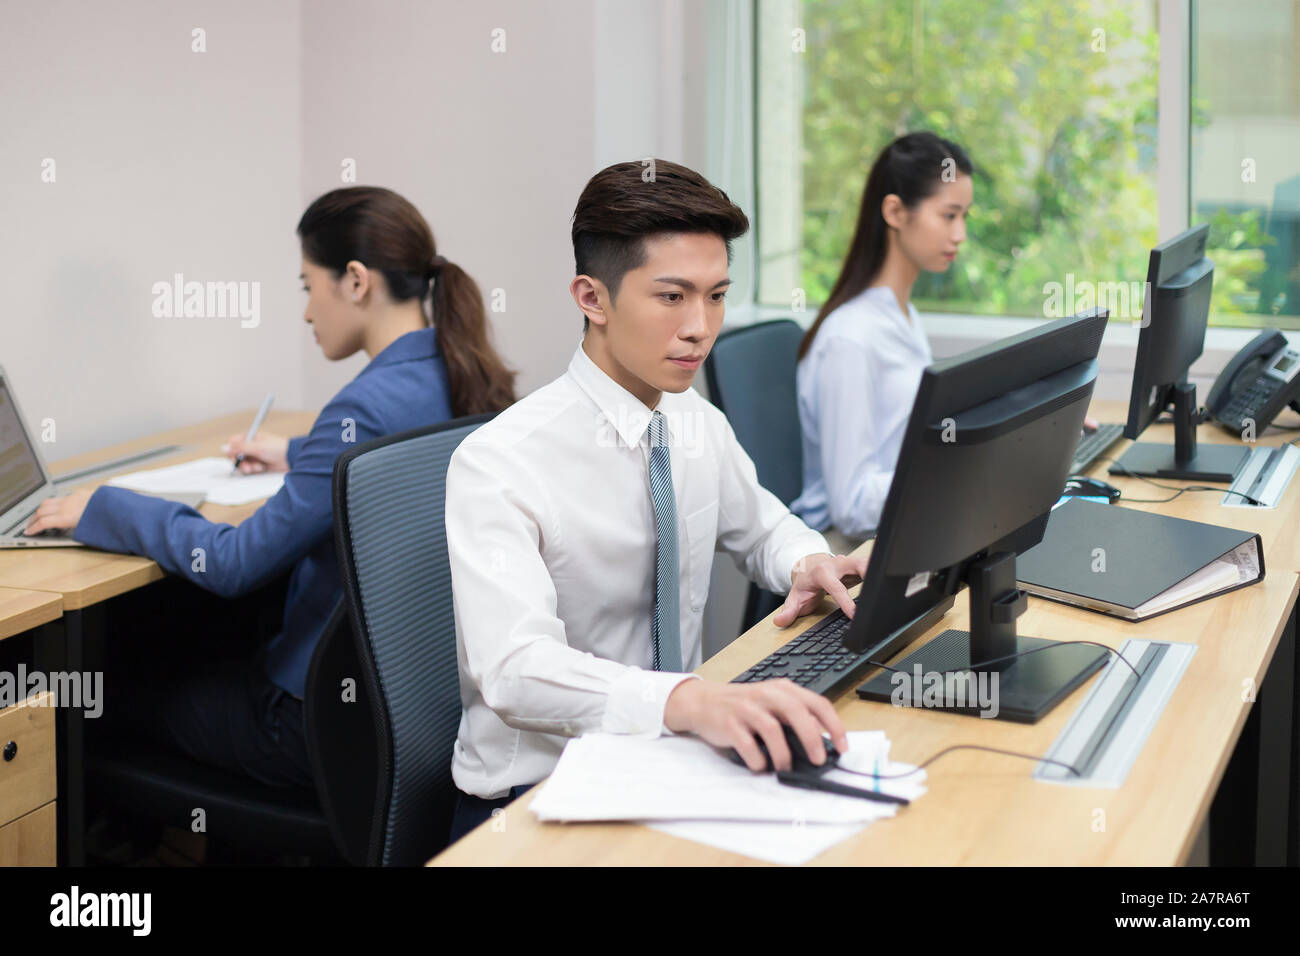 Photograph of three young male and female businesspeople working in an office with two using computers and another one using laptop Stock Photo